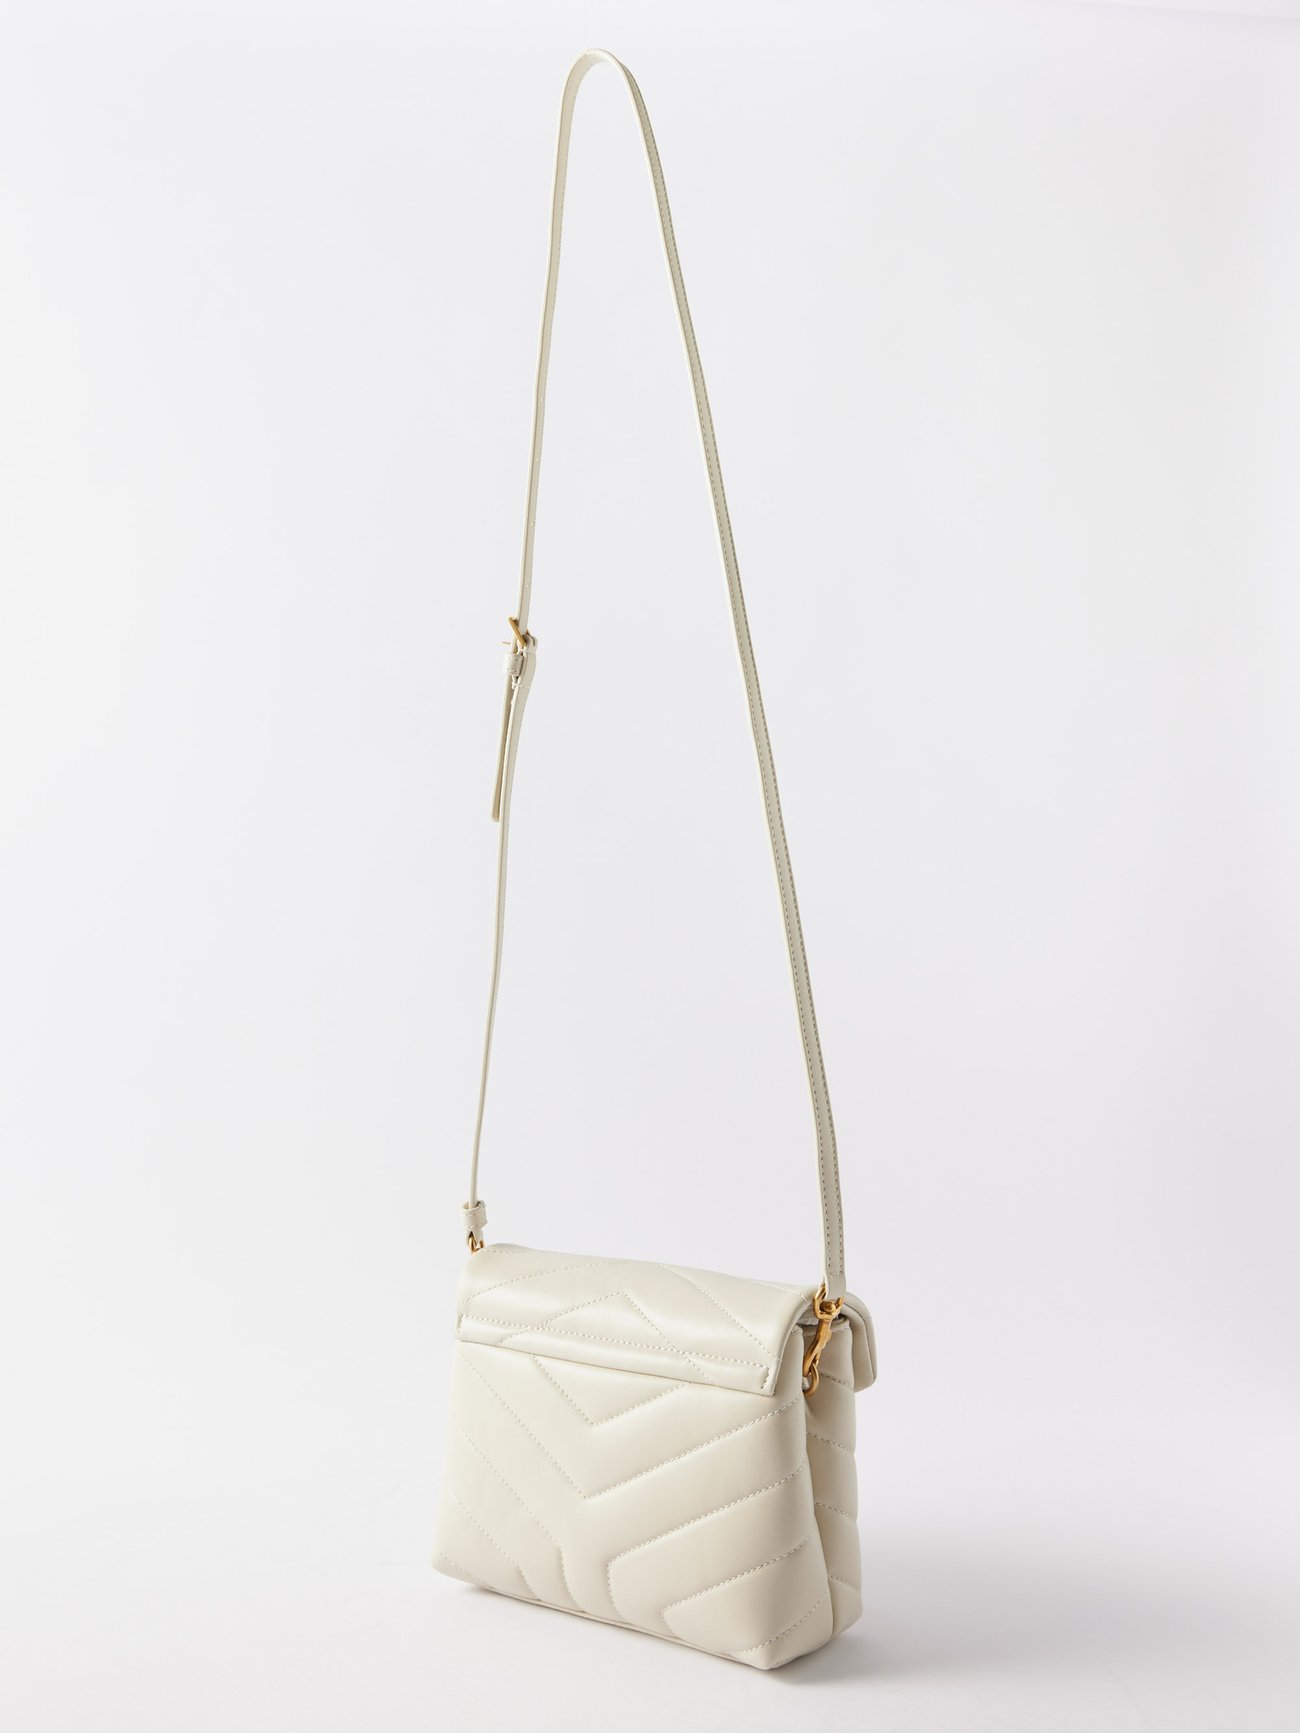 White Loulou Toy Strap Bag - Mini, Quilted Y Leather, YSL